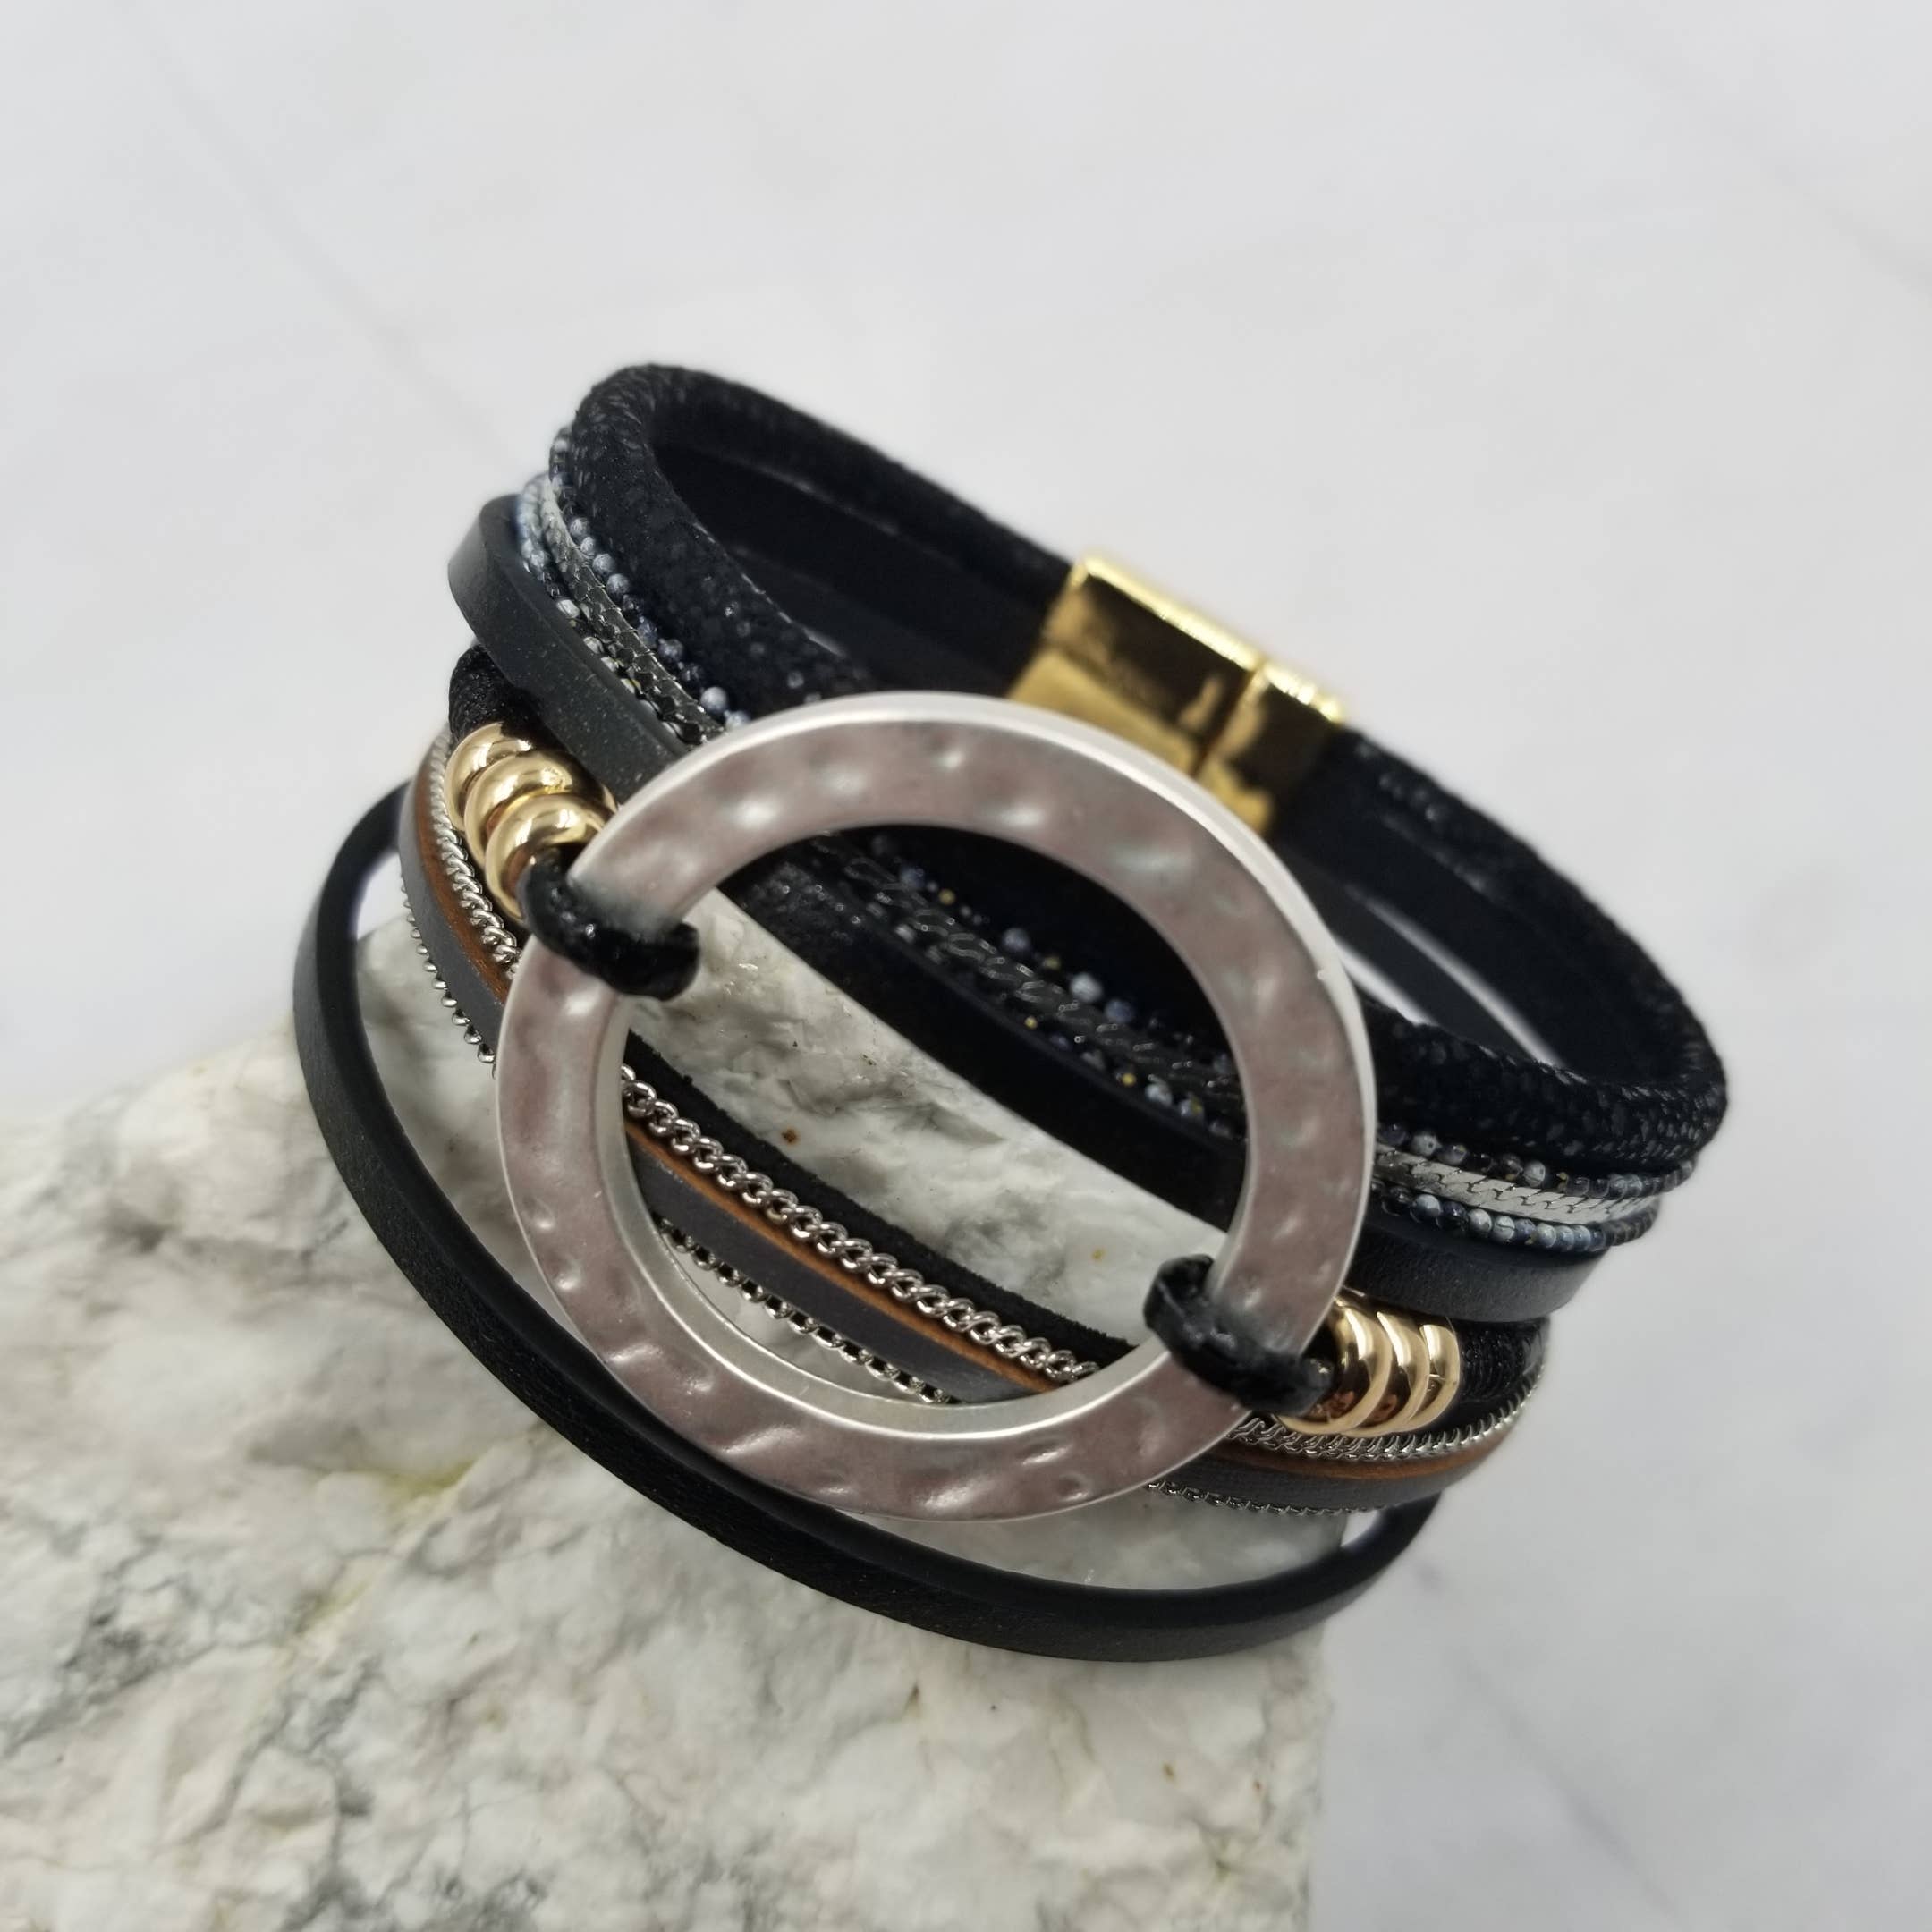 New Fashion 5 Layer Leather Bracelets  Charm Bangle Handmade Round Rope  Turn Buckle Bracelet For Women Men Low Price Wholesale  Price history   Review  AliExpress Seller  TYO Official Store  Alitoolsio